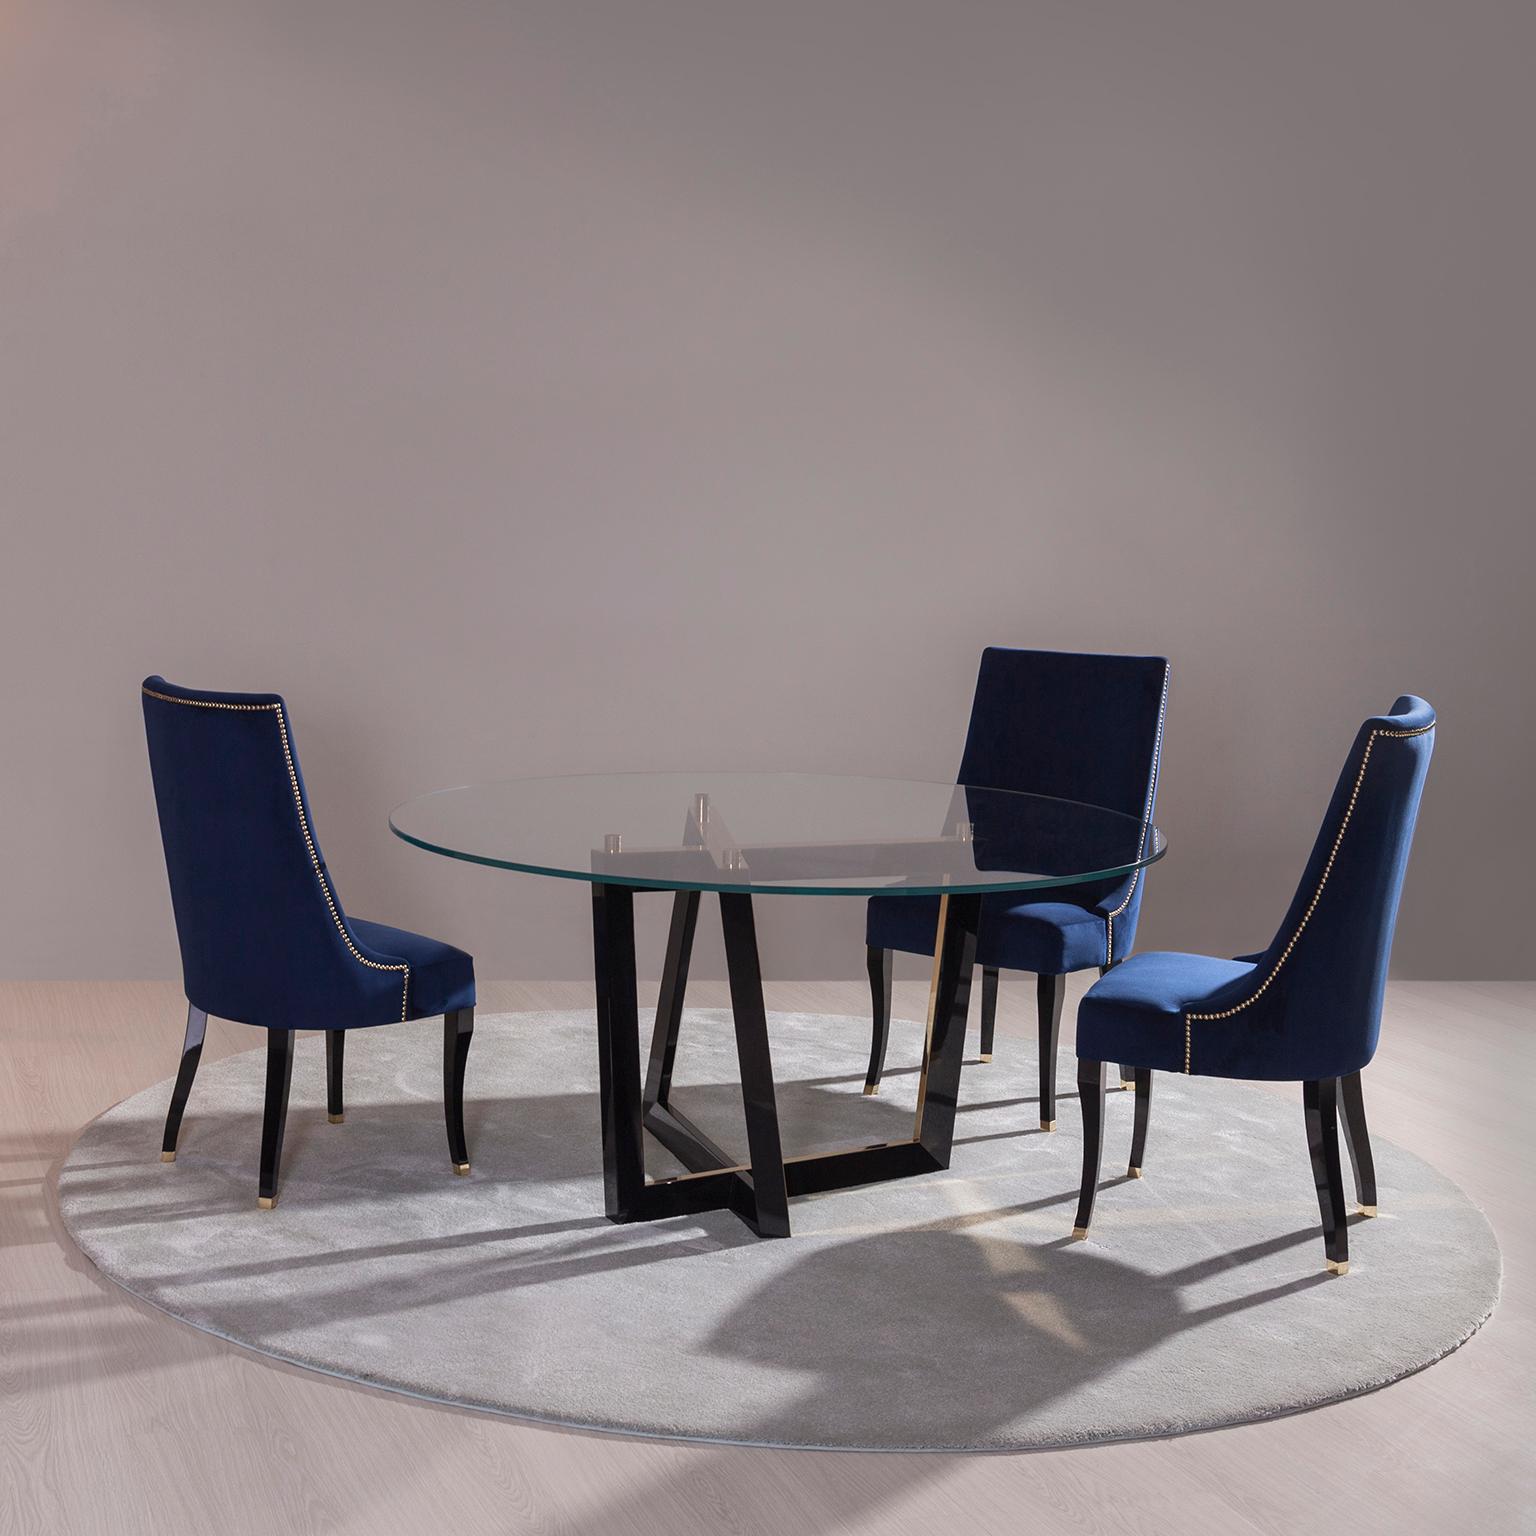 6 seater round glass dining table